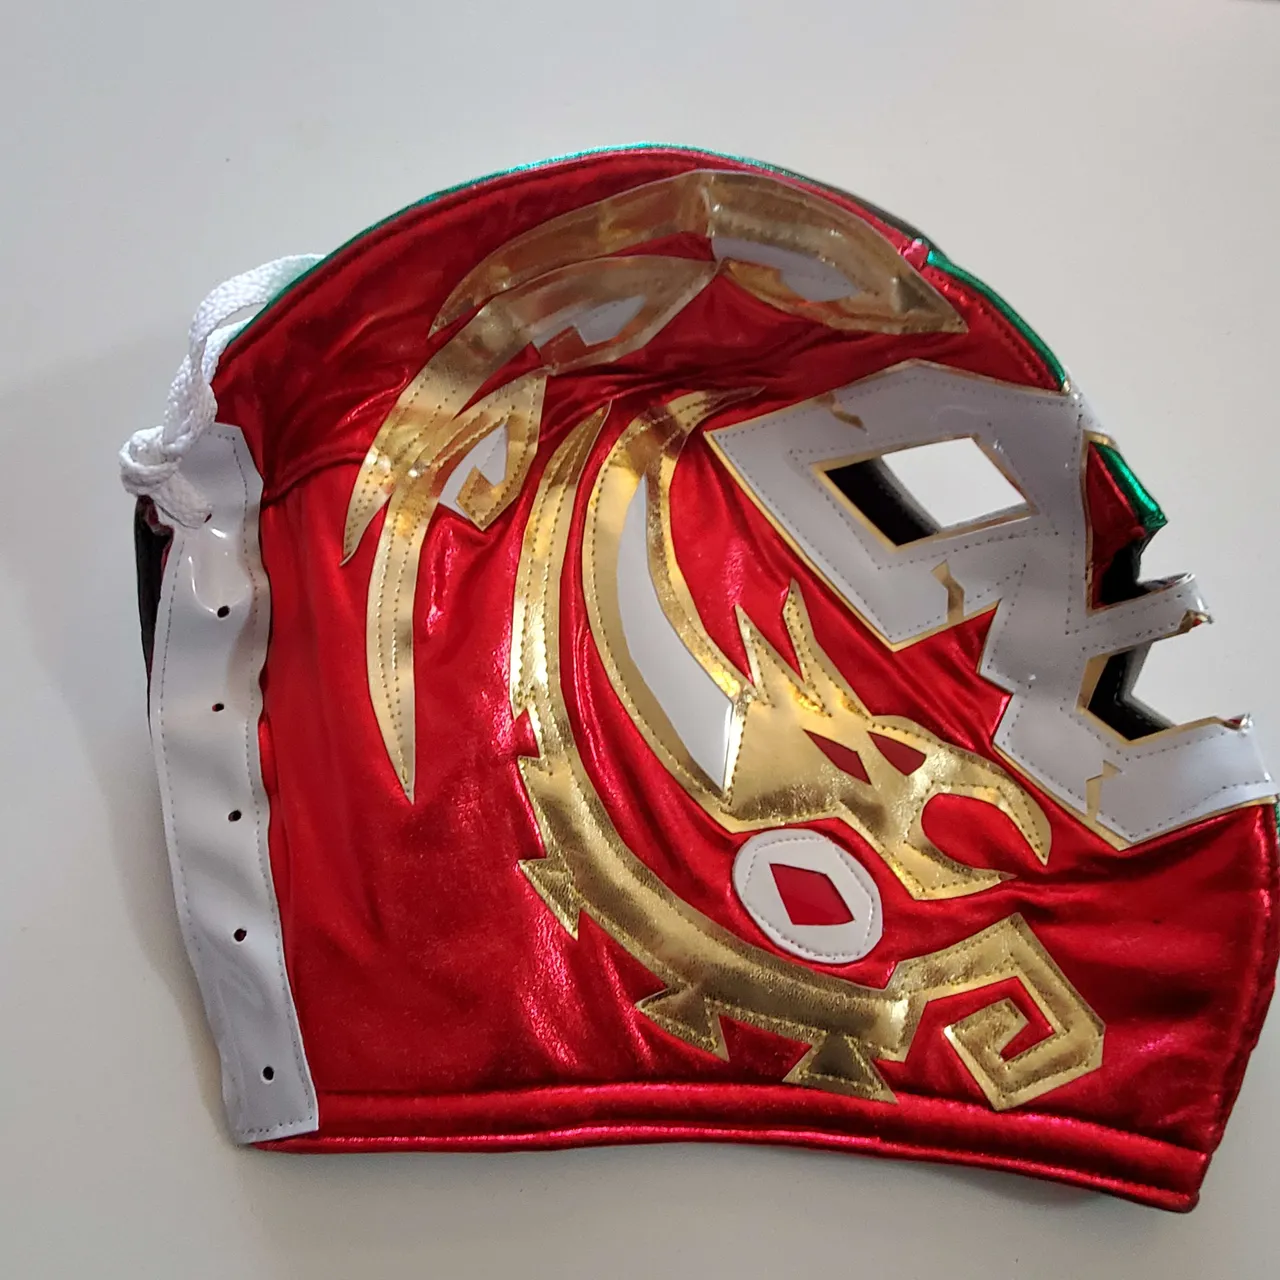 Mexician wrestlers mask photo 1